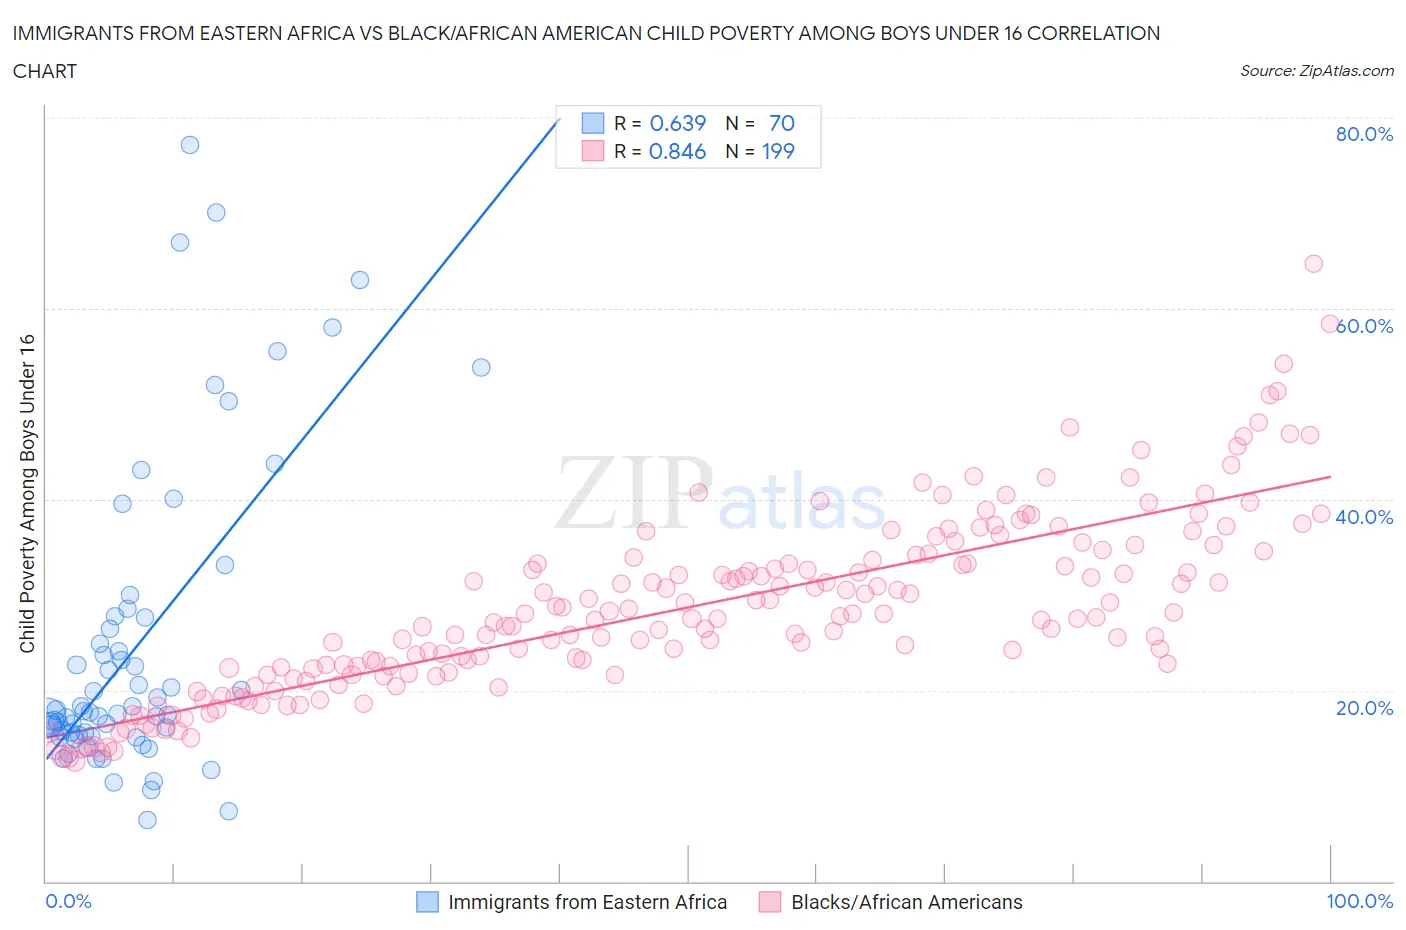 Immigrants from Eastern Africa vs Black/African American Child Poverty Among Boys Under 16